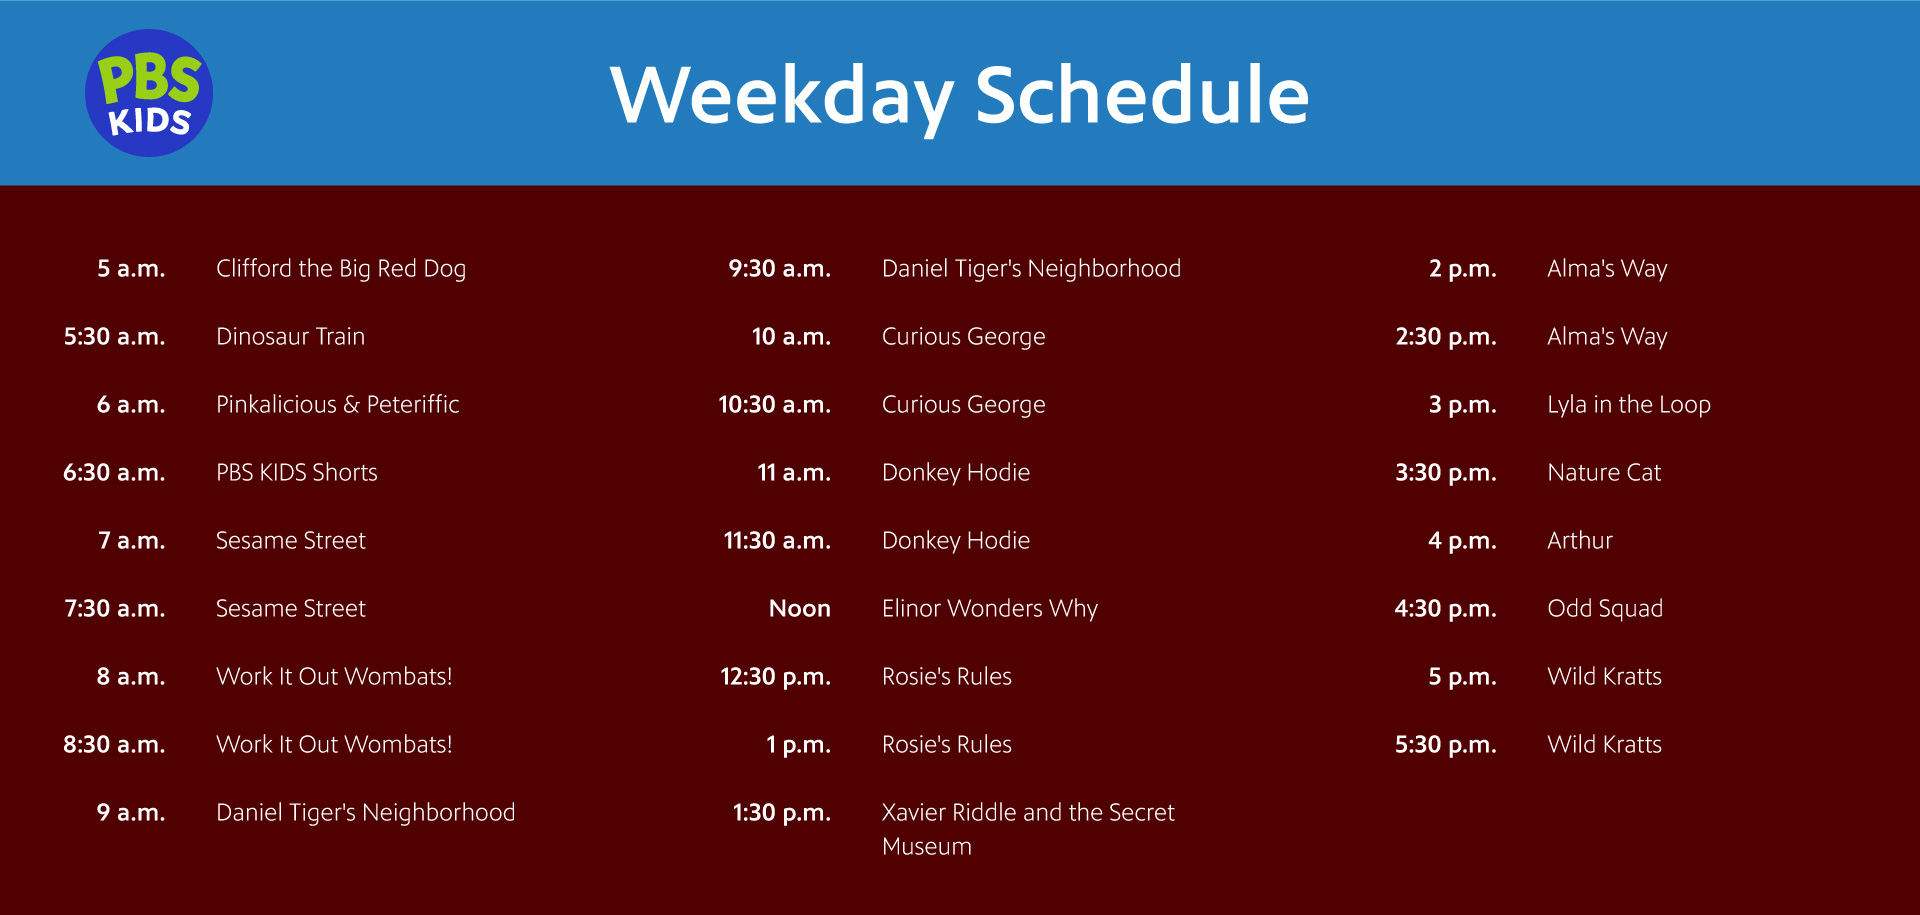 The PBS KIDS weekday schedule with changes as written out below.